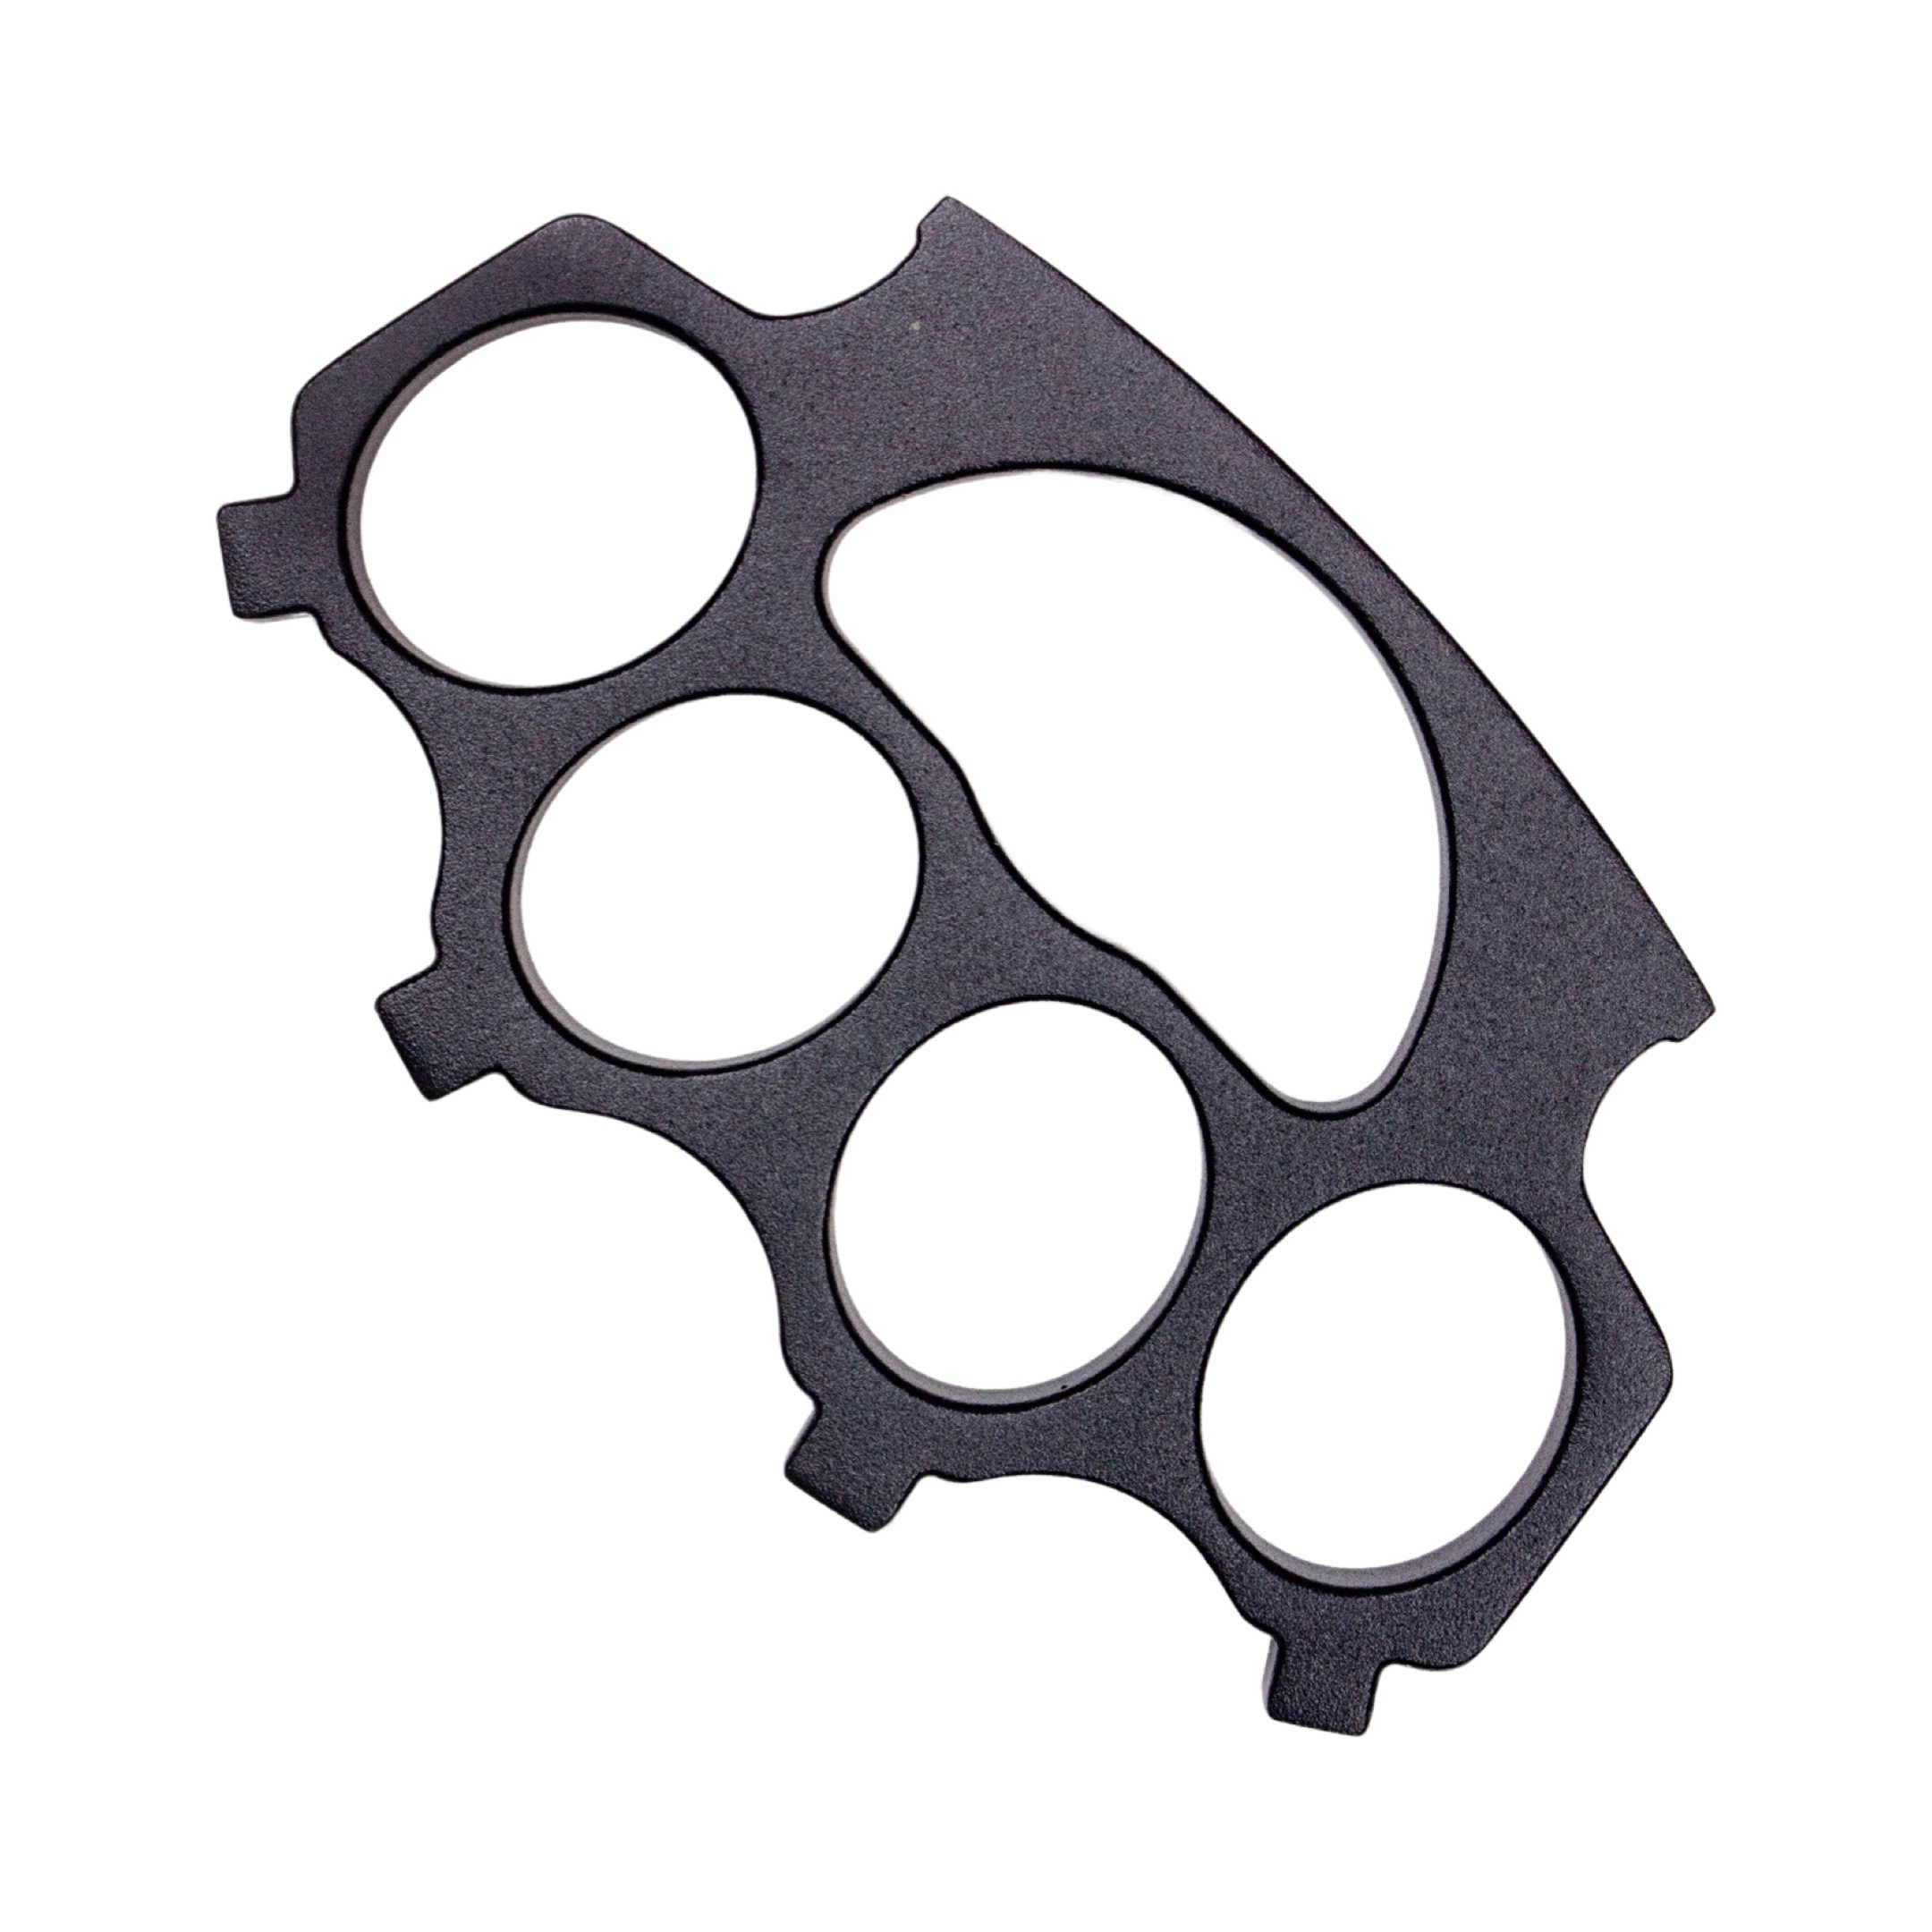 Max Knives American brass knuckles USA 30-06 with black 440 stainless steel  bullet grip